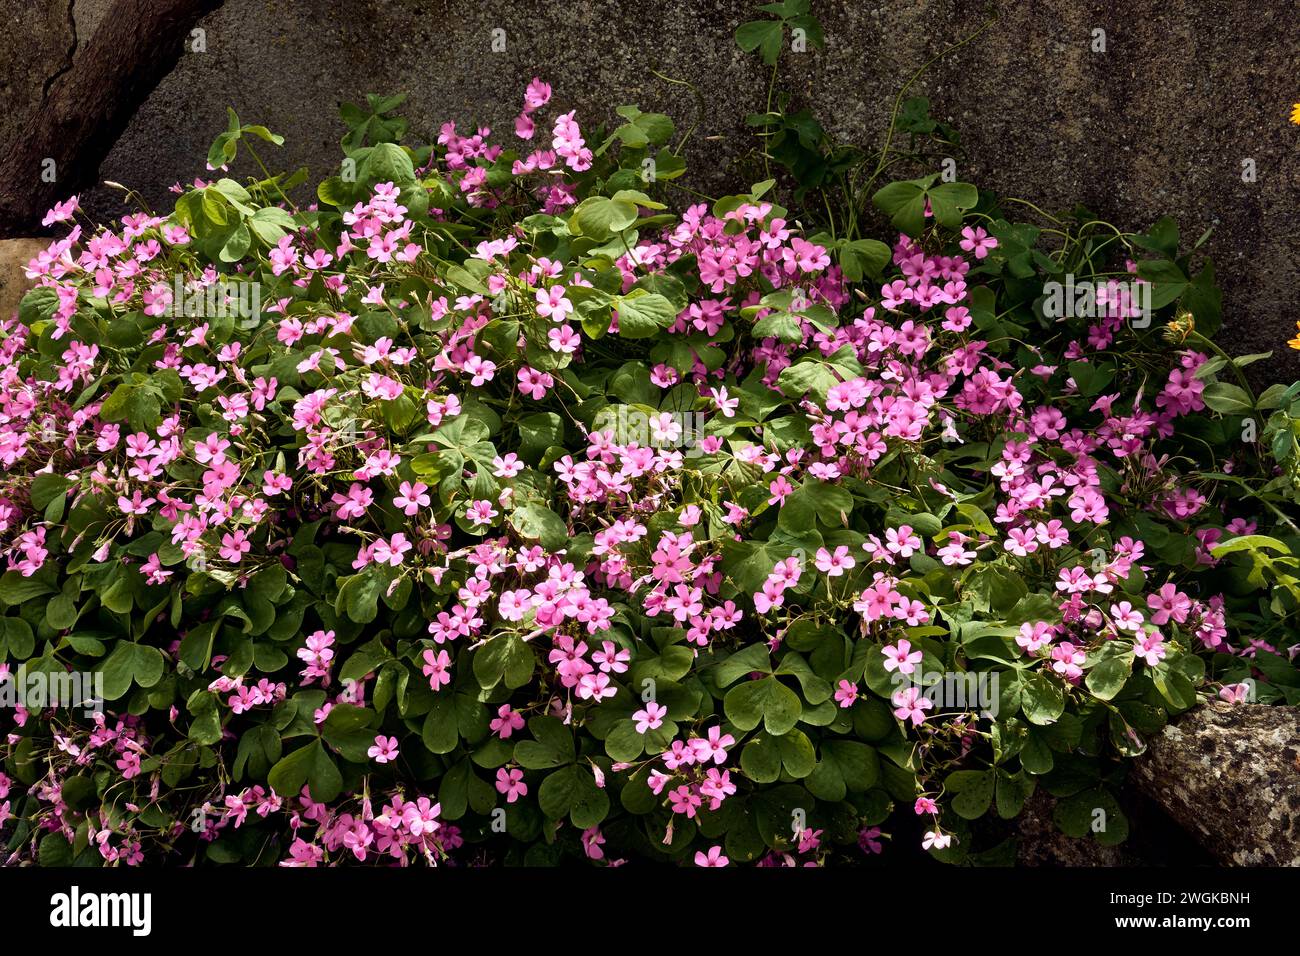 Giant clover (Trifolium, Oxalis articulata) in the patio of a town house. Detail plan. Stock Photo